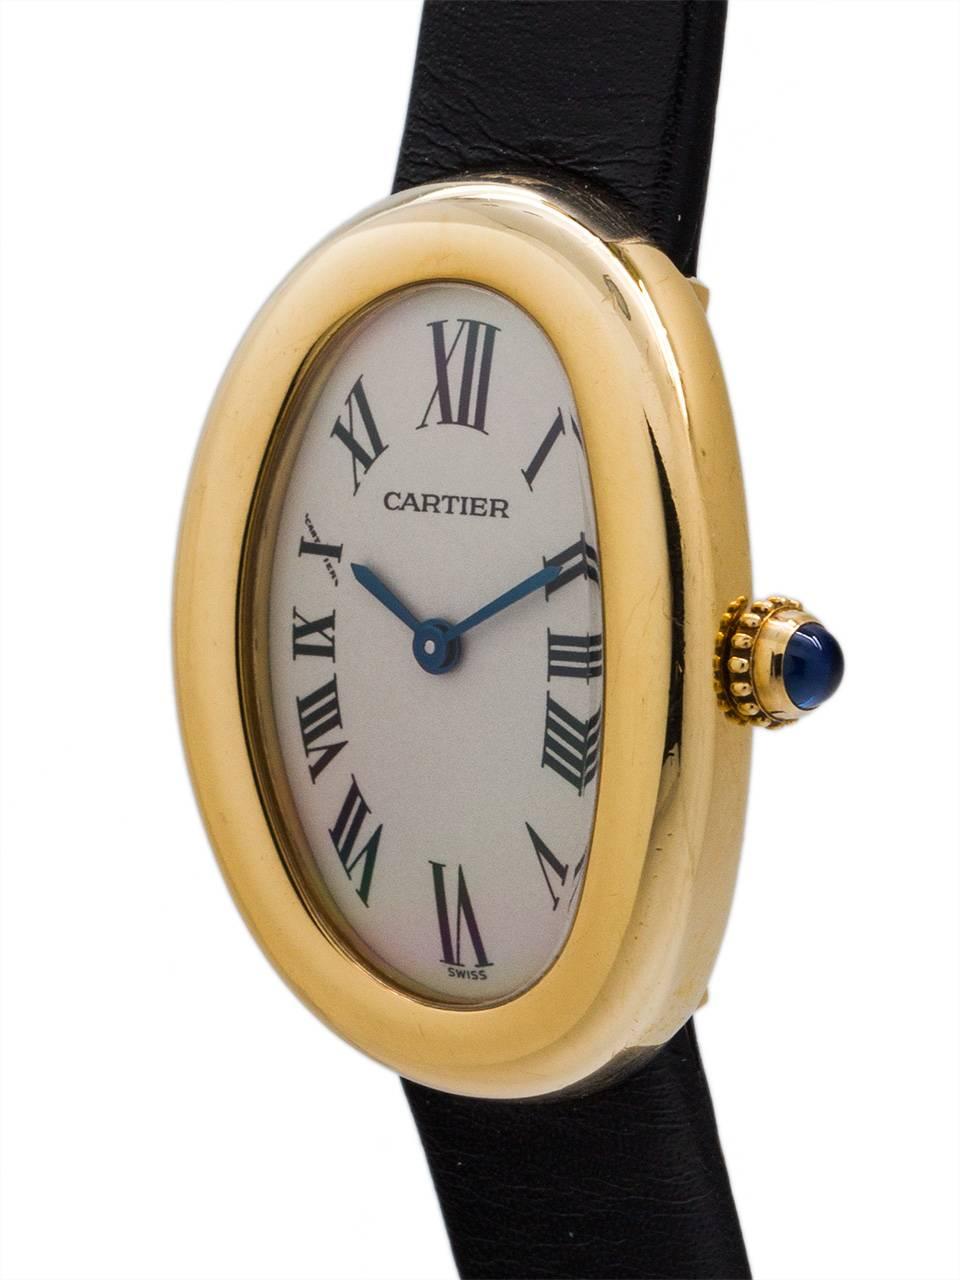 
Cartier 18K YG “Baignoire”  circa 1990’s. Featuring bathtub shaped 22 X 31mm curved back case secured by screws, with classic white Roman dial with blued steel hands and cabachon sapphire crown. Battery powered quartz movement.  With generic black